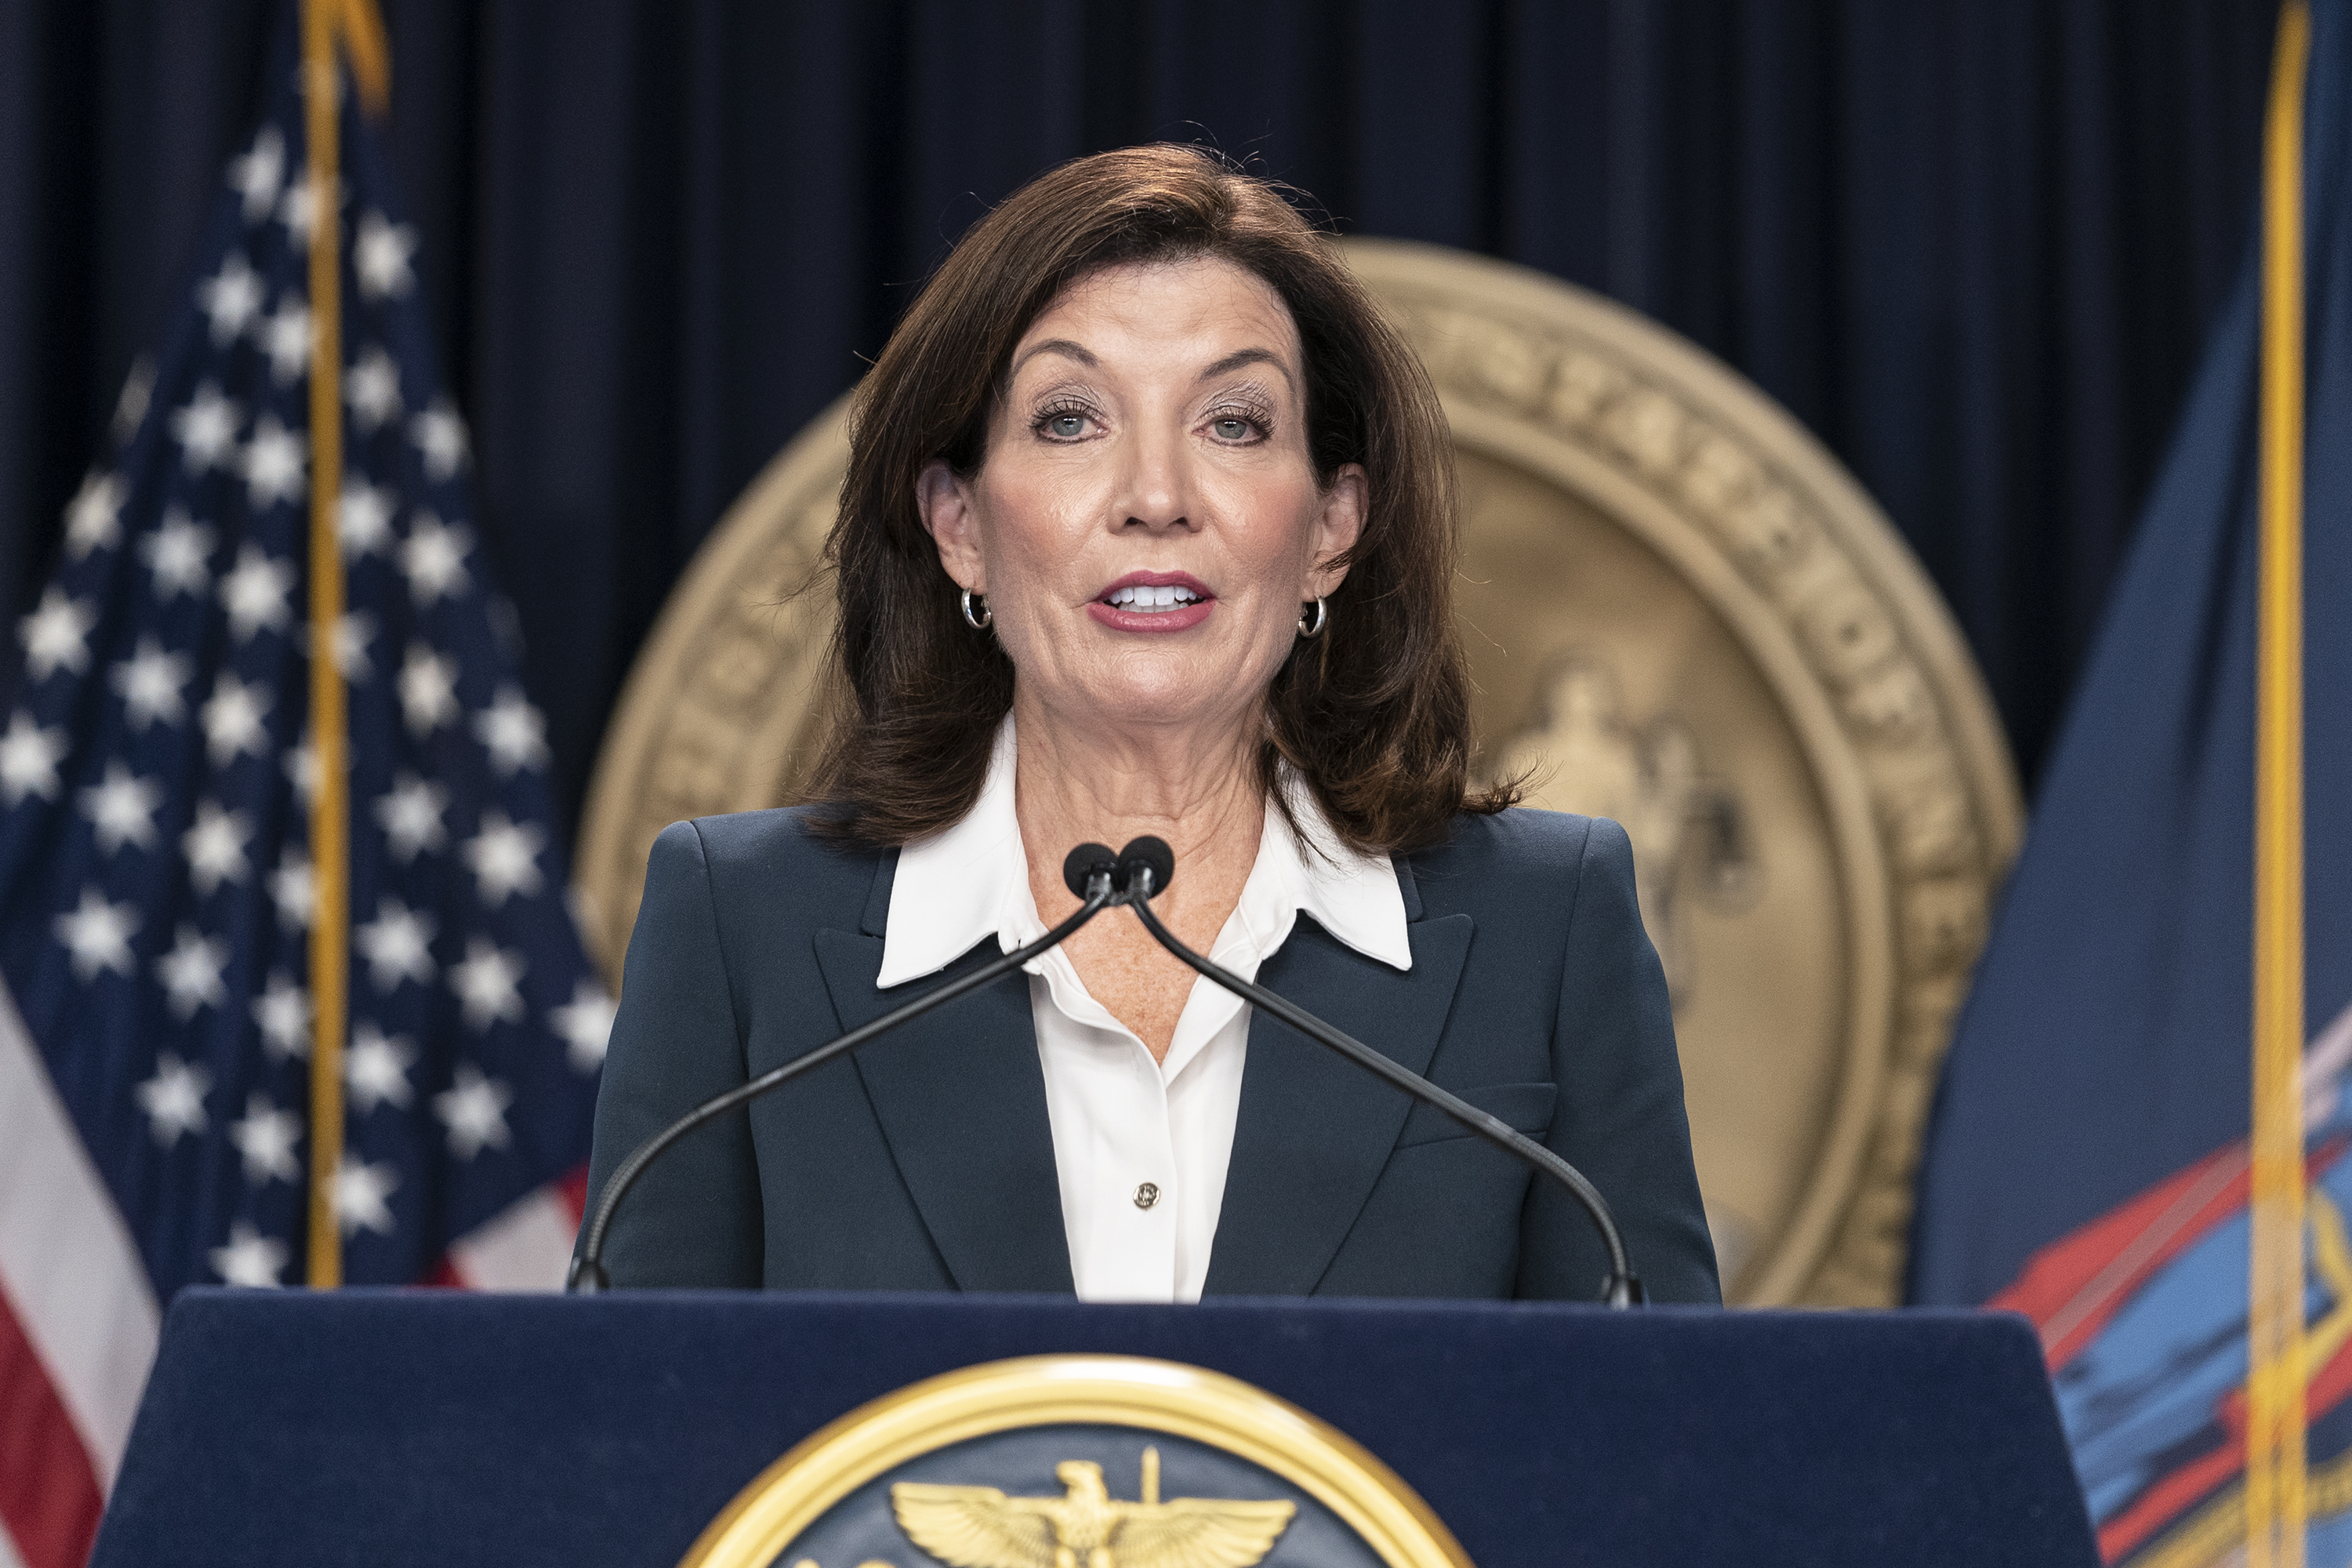 New York State Governor Kathy Hochul COVID-19 gives a press briefing to address the rising cases in the state and the new variant Omicron on 29th November 2021 in New York, United States.